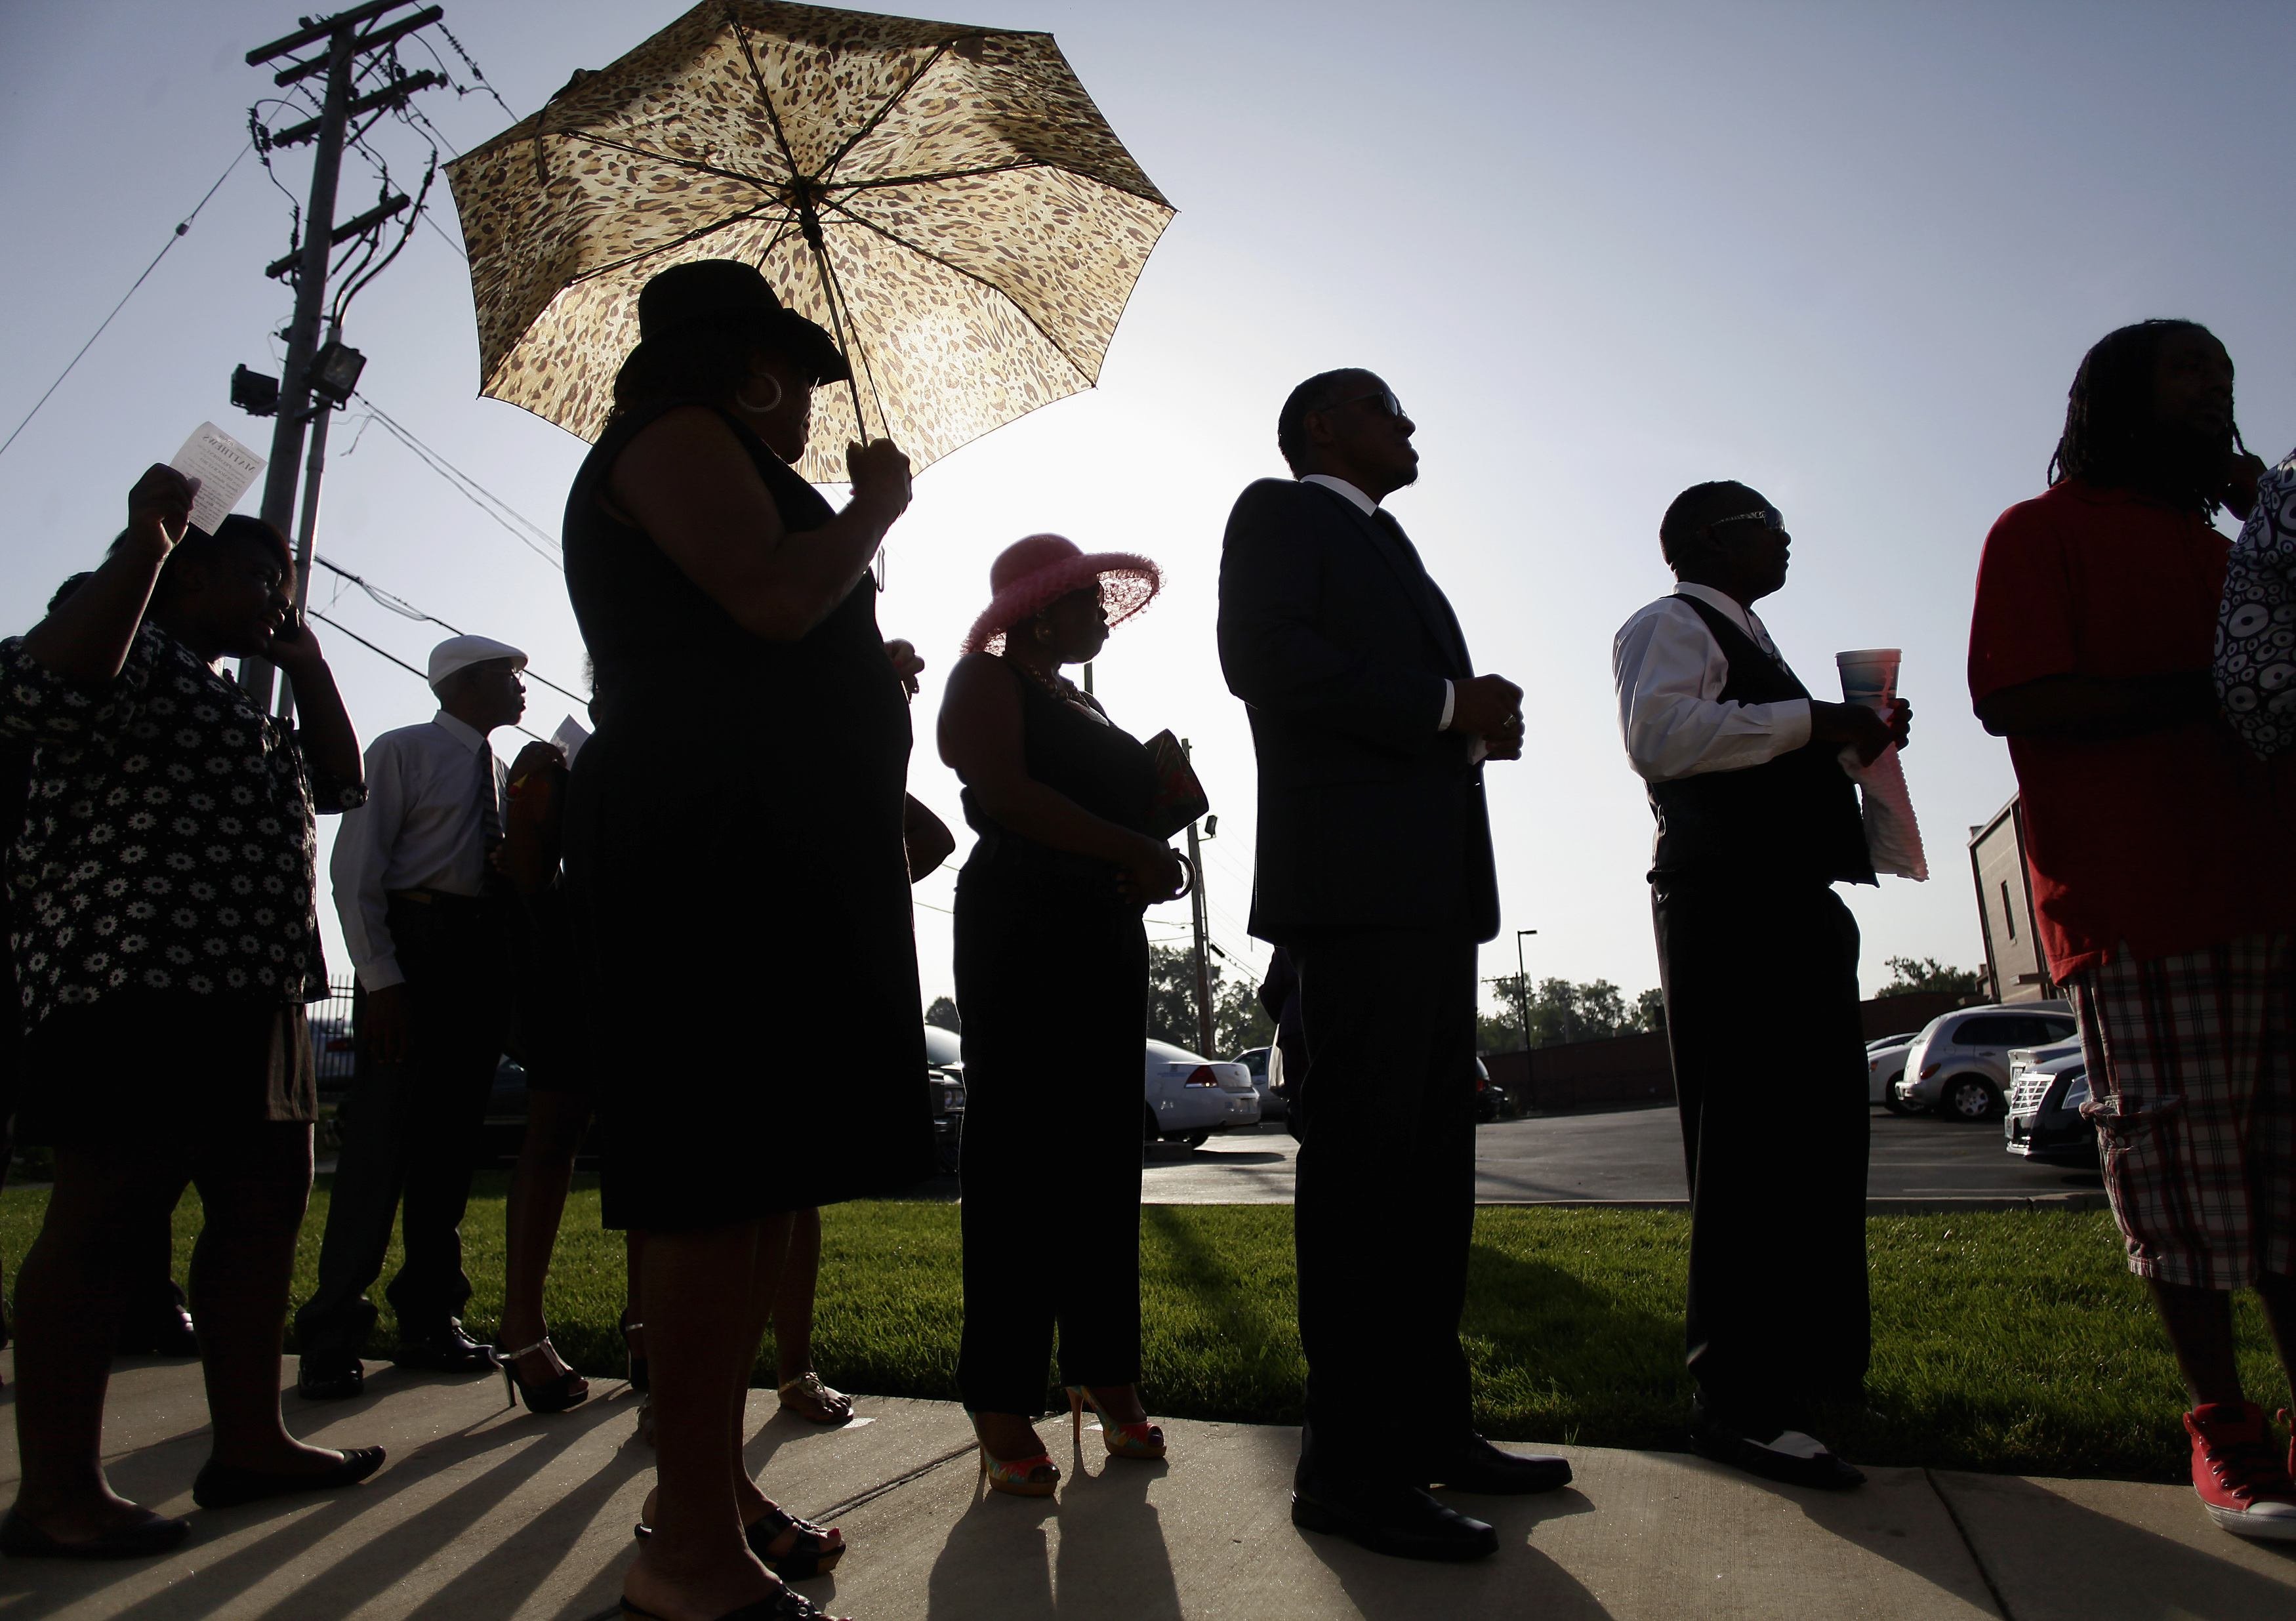 People wait in line to attend the funeral for Michael Brown at Friendly Temple Missionary Baptist Church in St. Louis on Aug. 25, 2014.